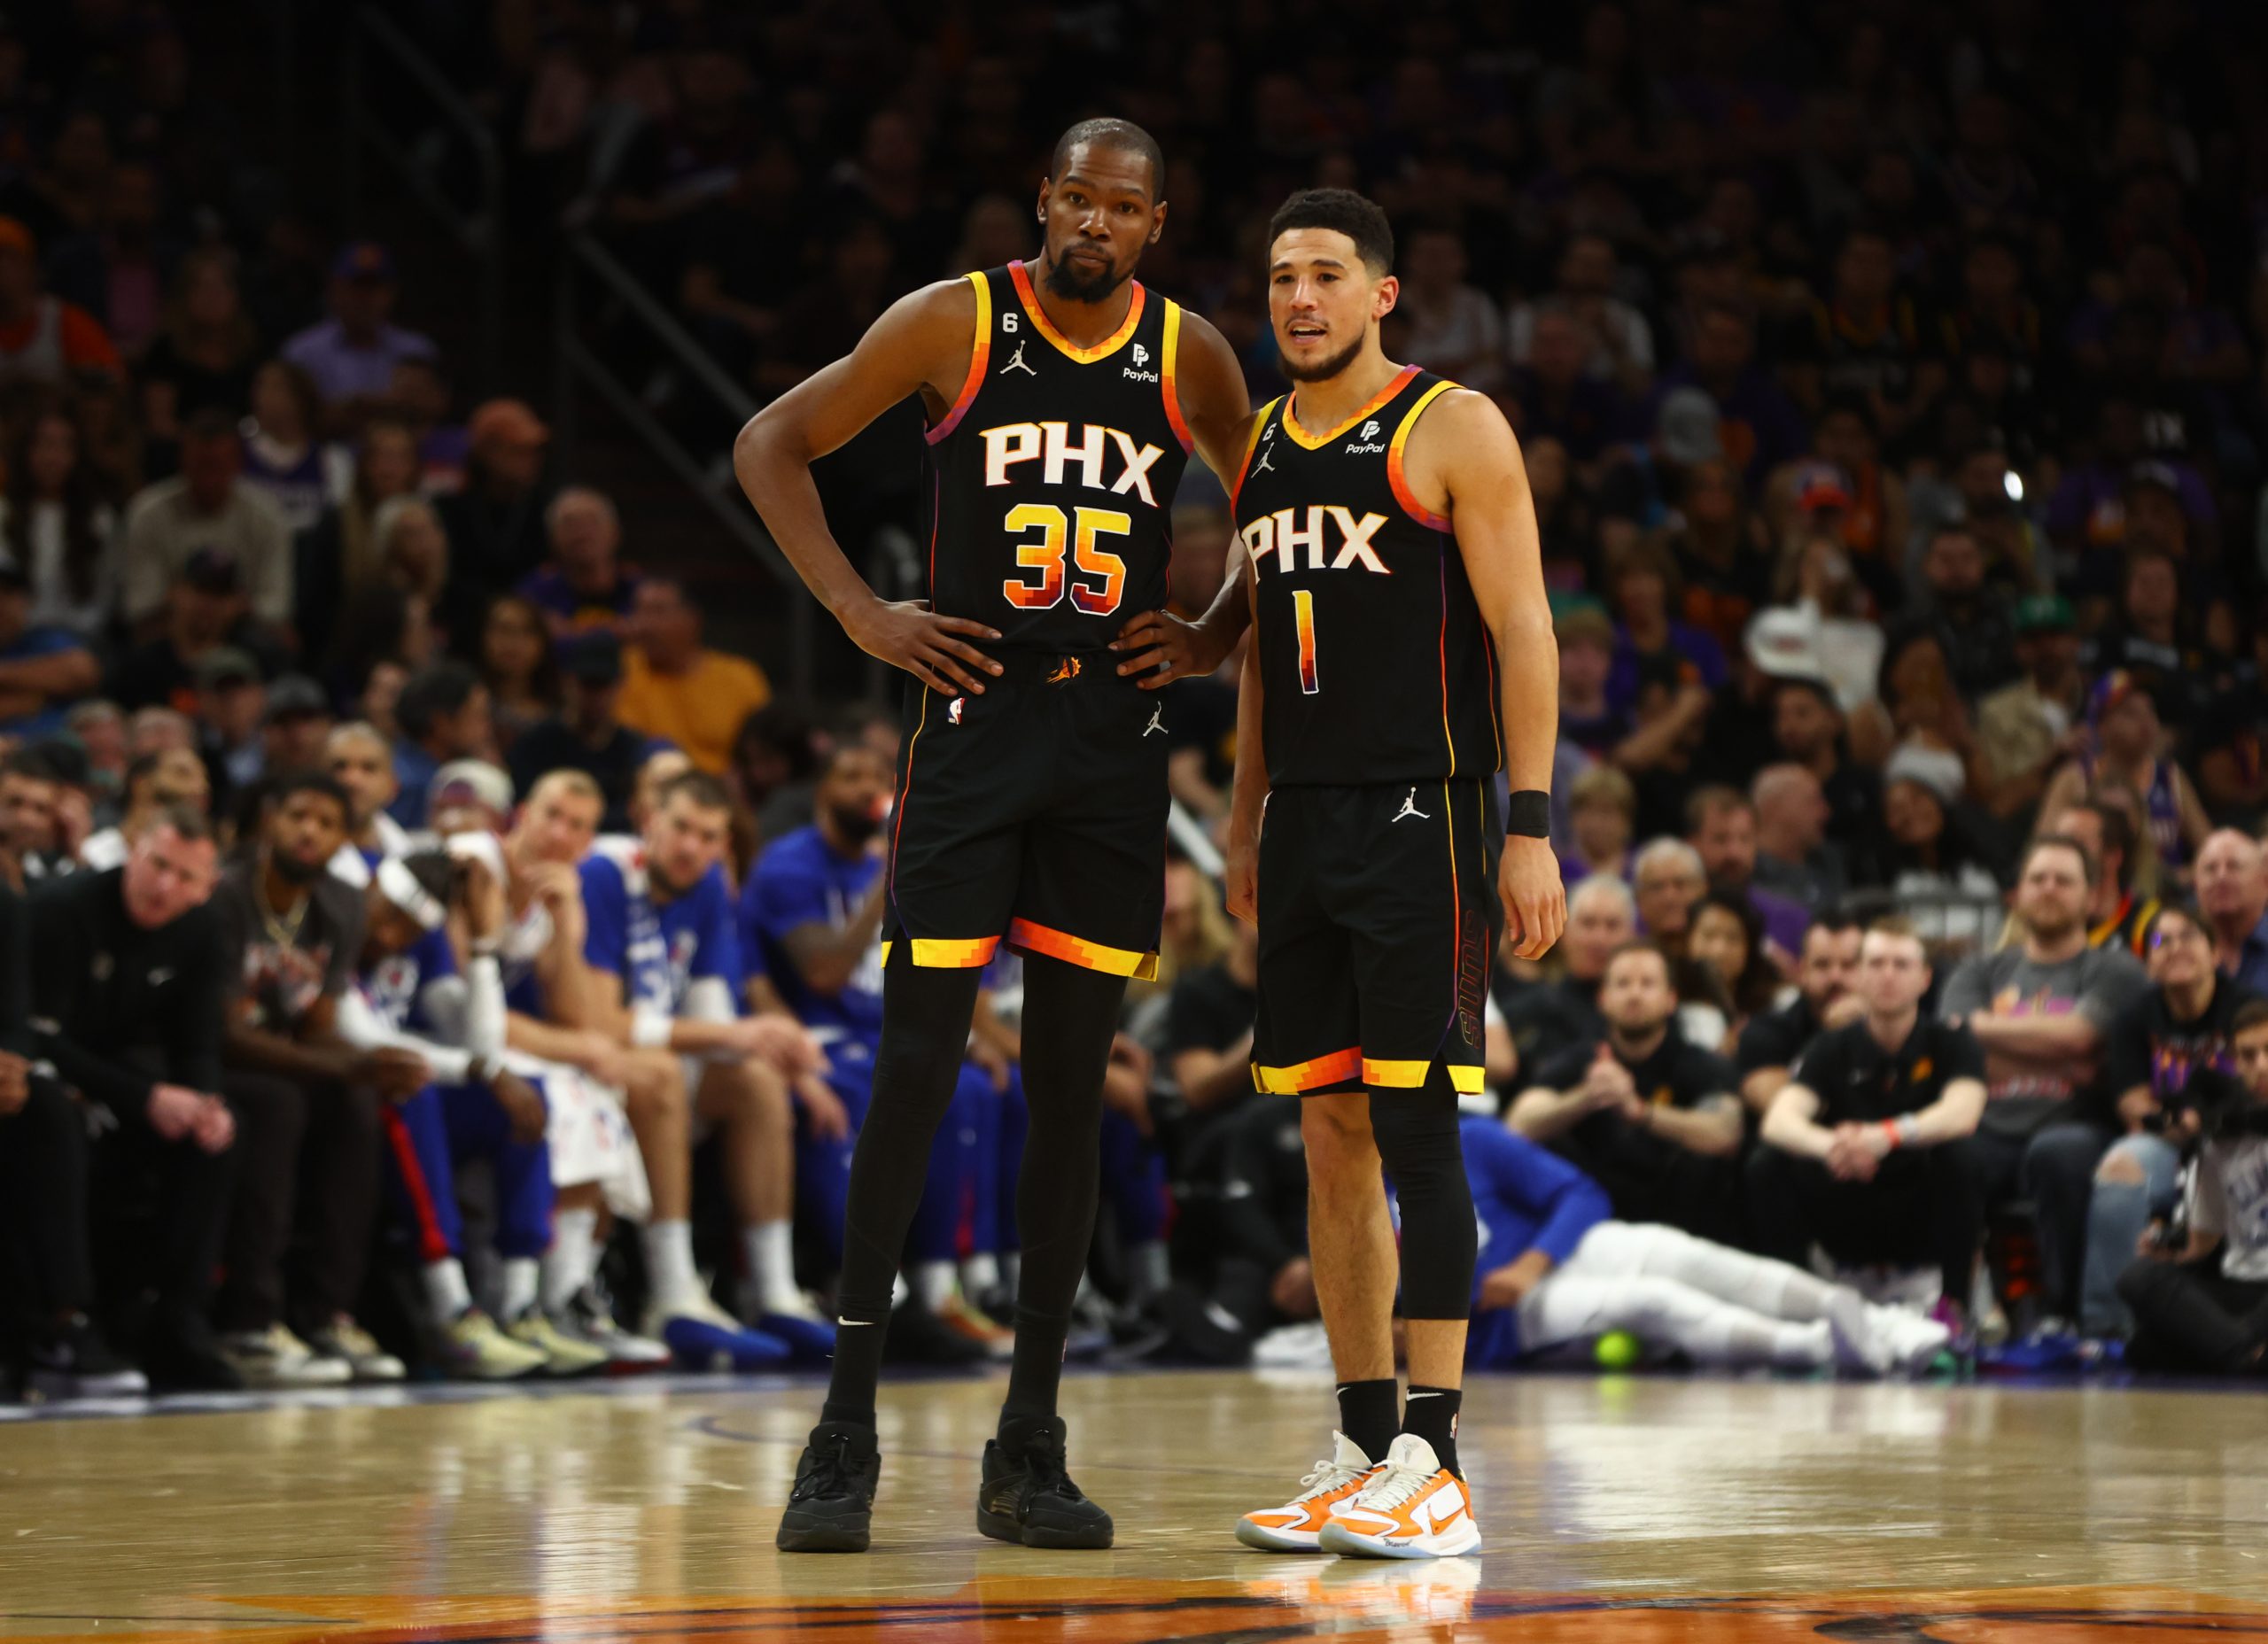 Apr 18, 2023; Phoenix, Arizona, USA; Phoenix Suns guard Devin Booker (1) with forward Kevin Durant (35) against the Los Angeles Clippers in the second half during game two of the 2023 NBA playoffs at Footprint Center. Mandatory Credit: Mark J. Rebilas-USA TODAY Sports